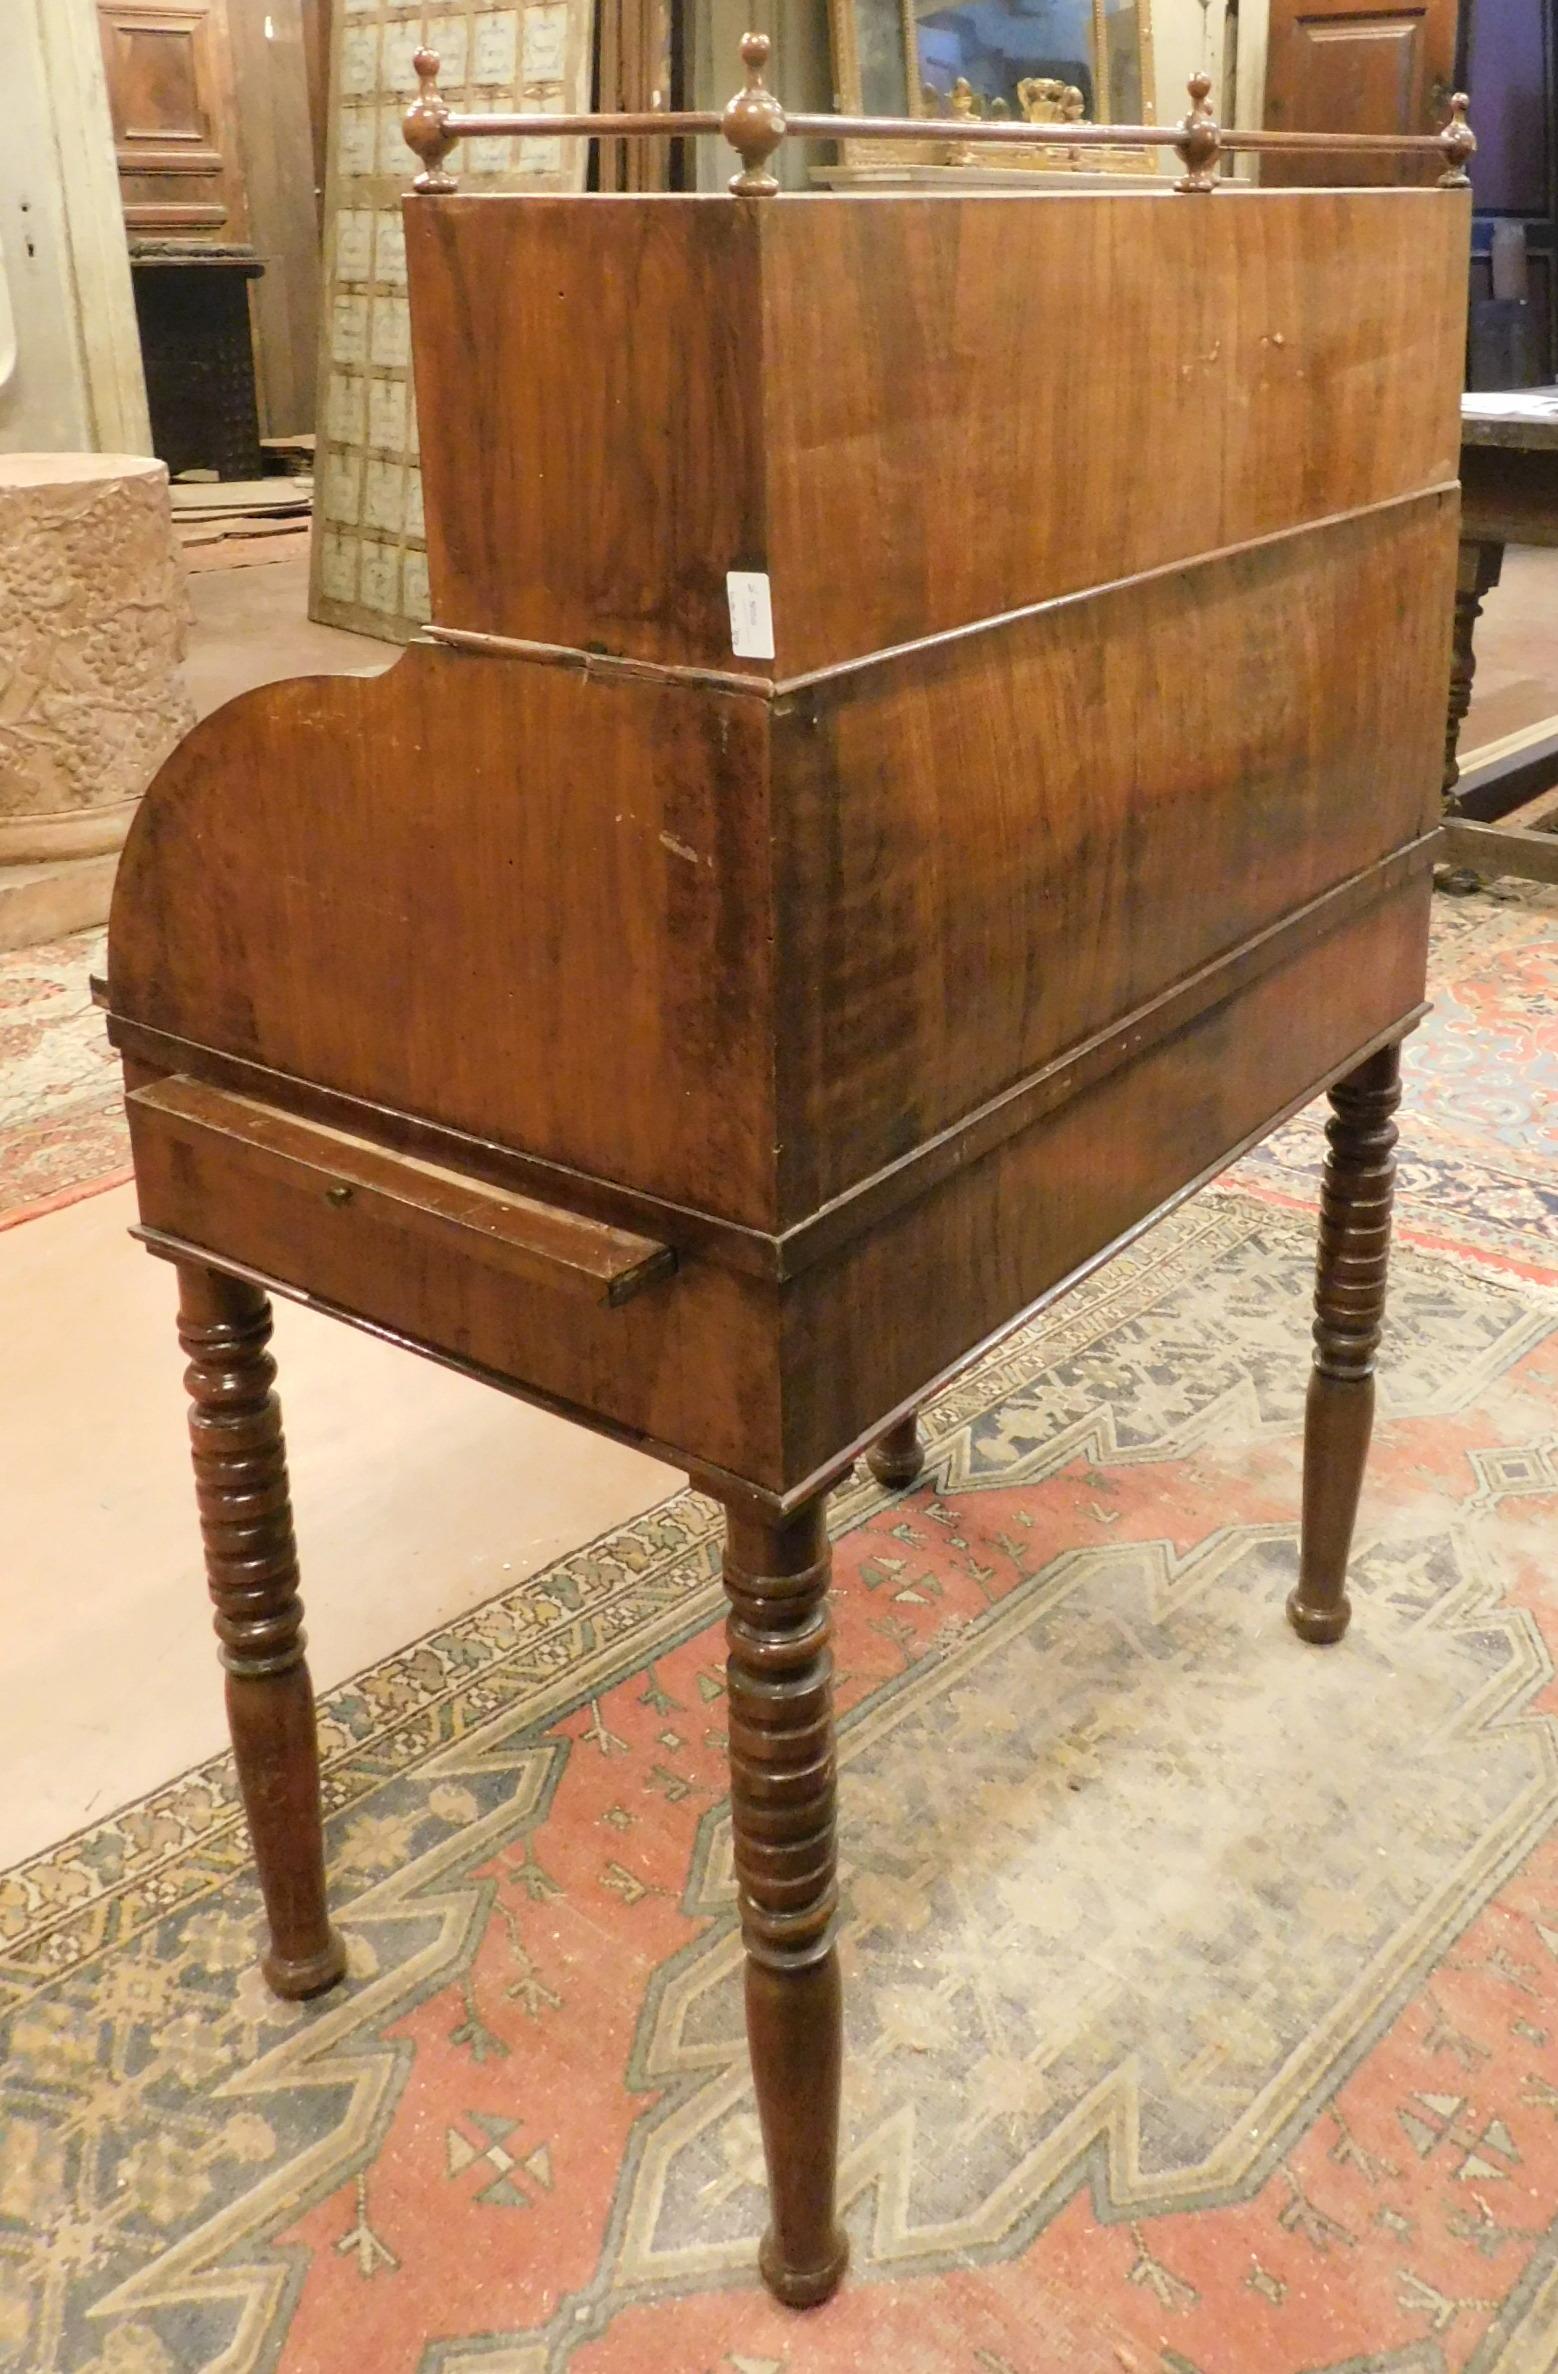 Italian Writing Desk Table in Walnut, Drawers and Pull-Out Shelves, 19th Century Italy For Sale